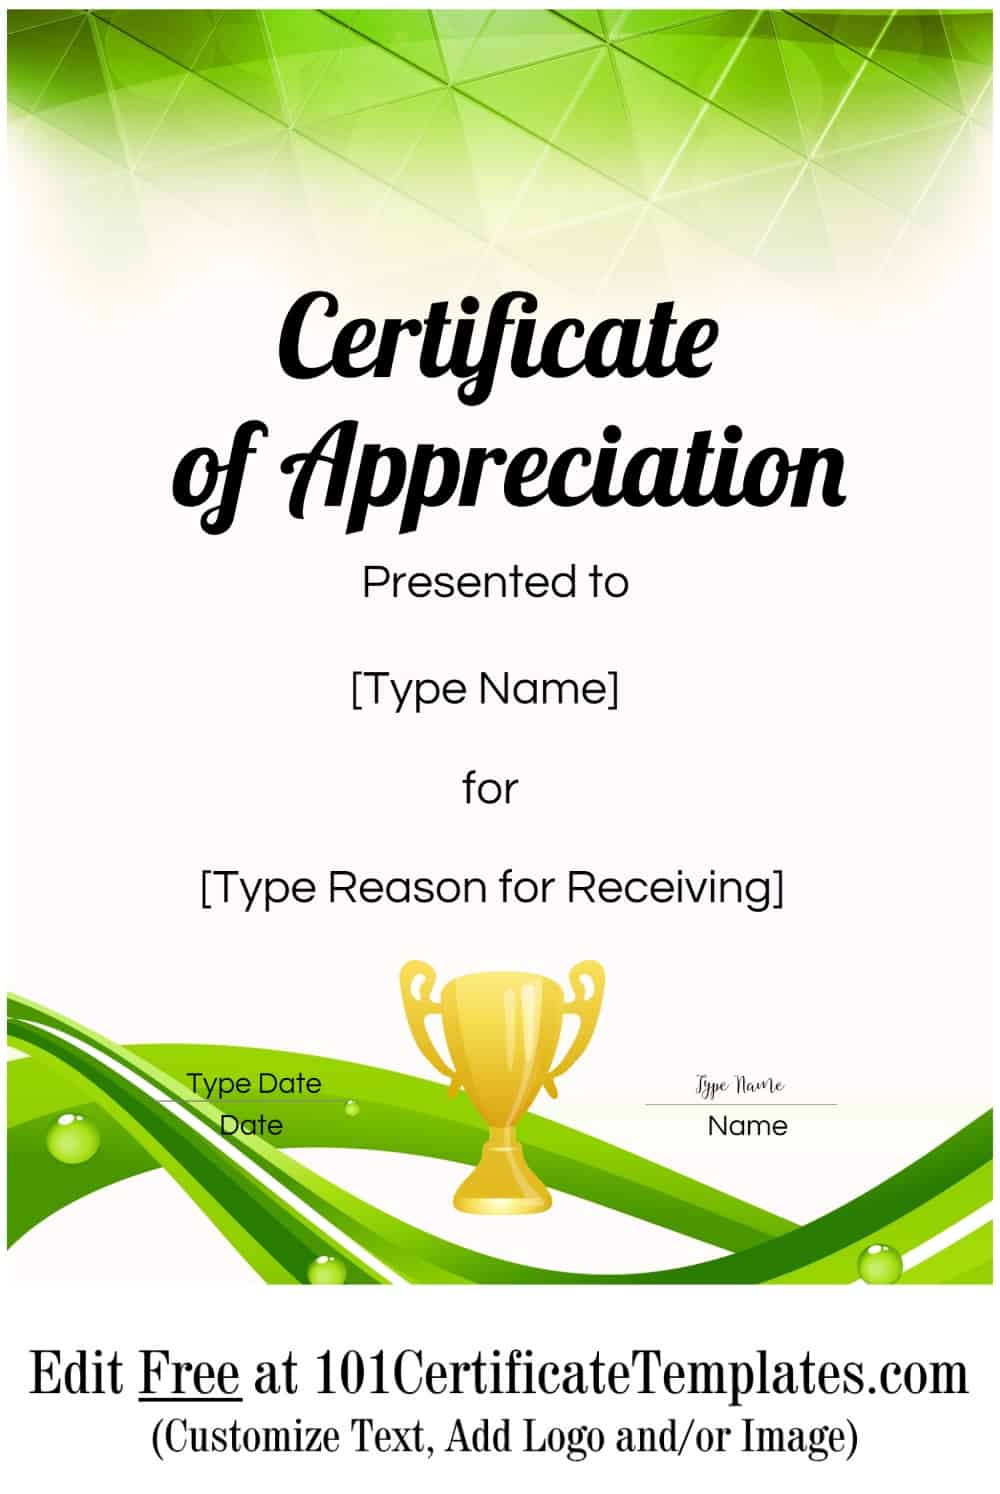 Certificates Of Appreciation Templates For Word | Doctemplates for Fascinating Certificate Of Recognition Template Word